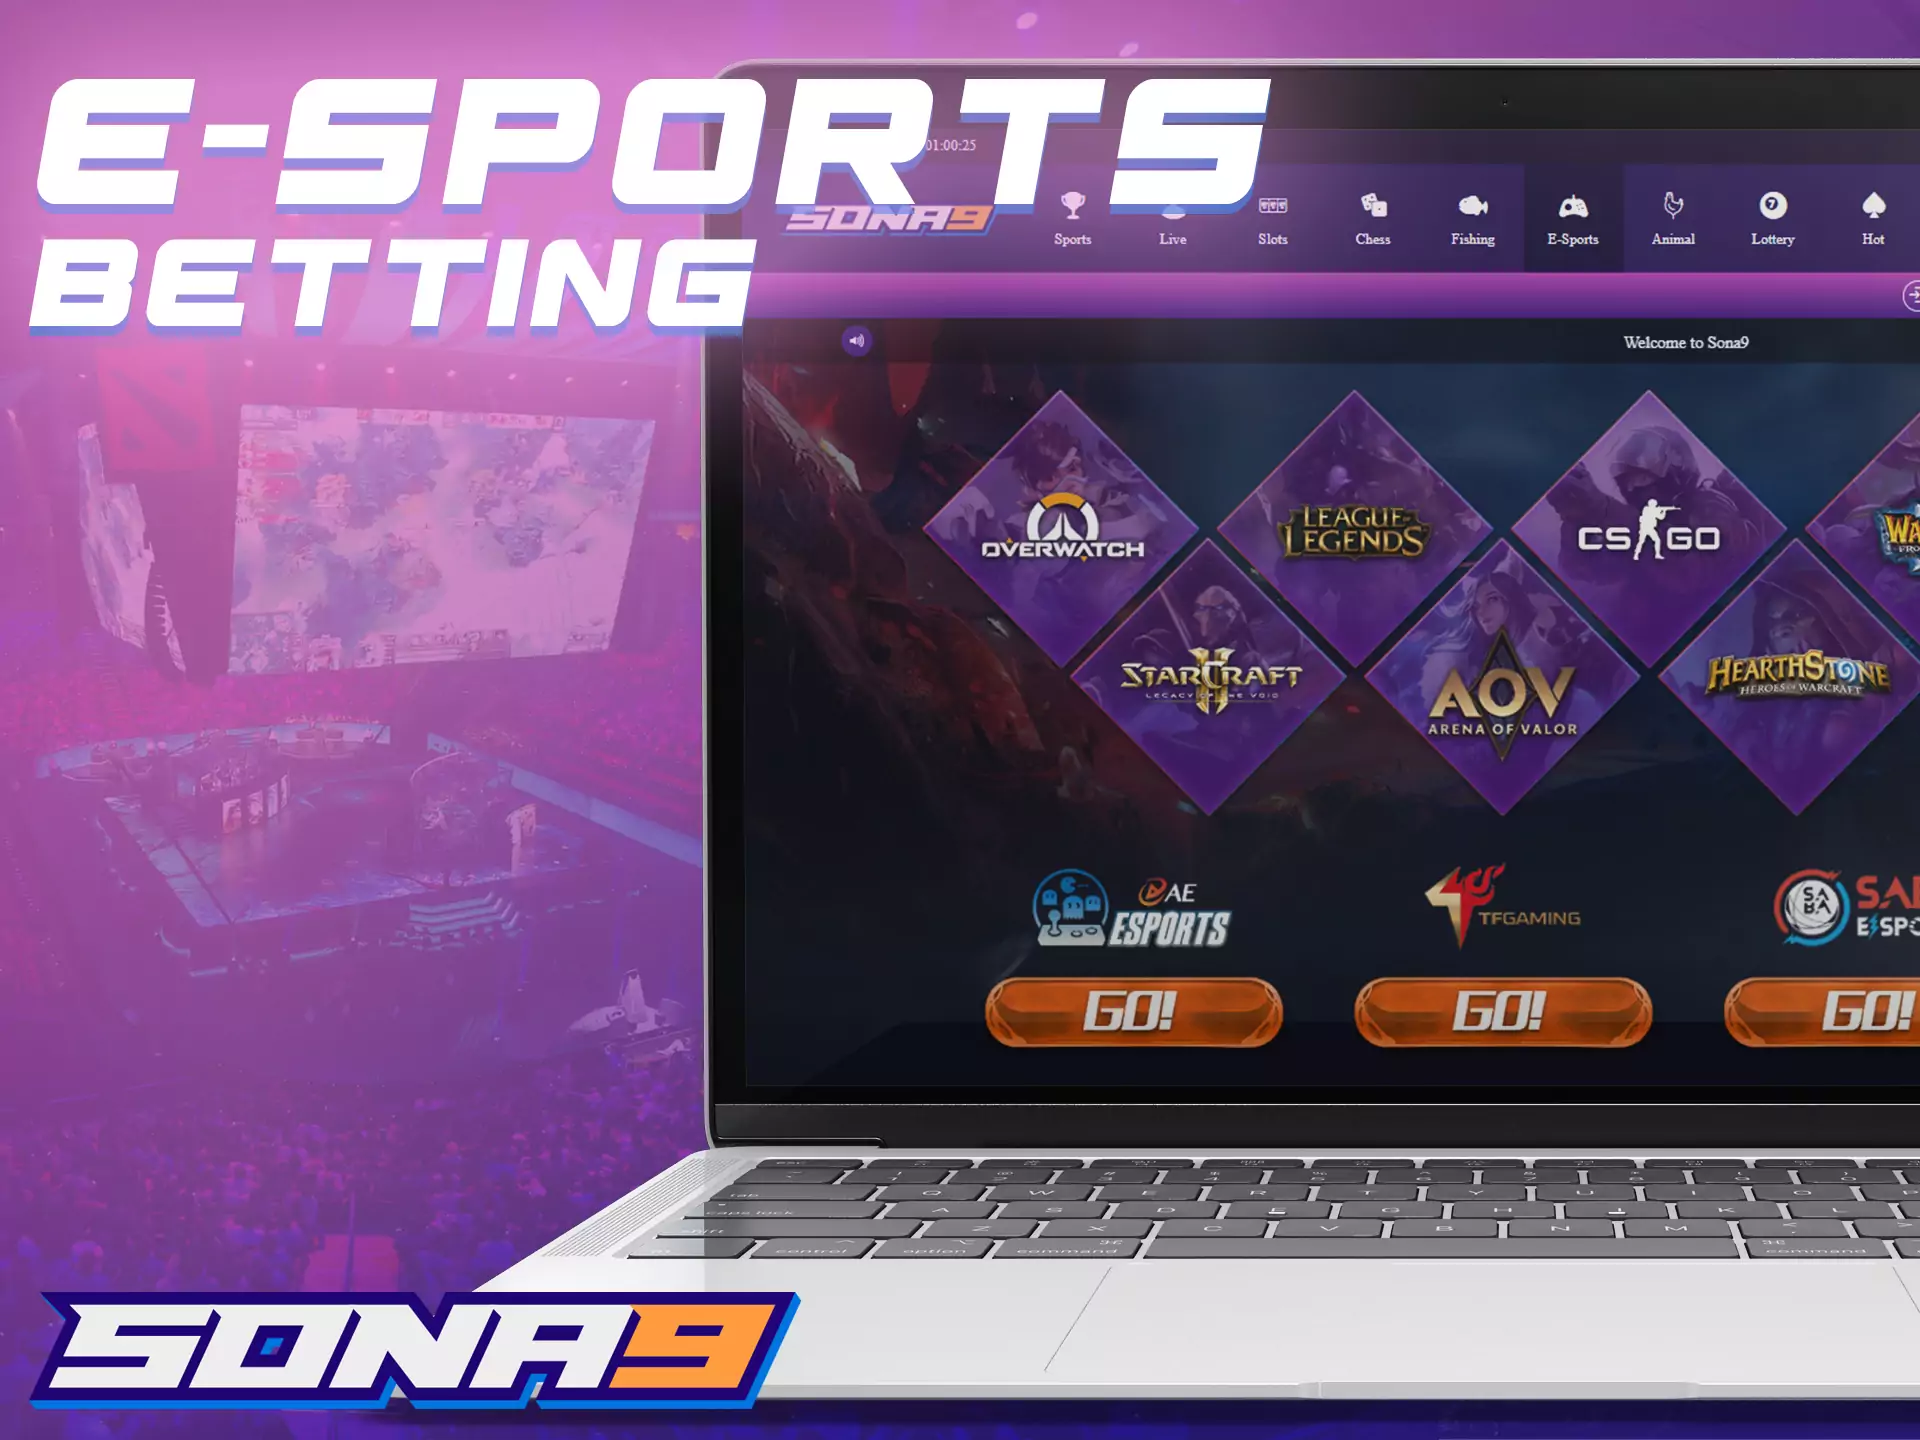 Betting on esports is available in the Sona9 sportsbook as well.